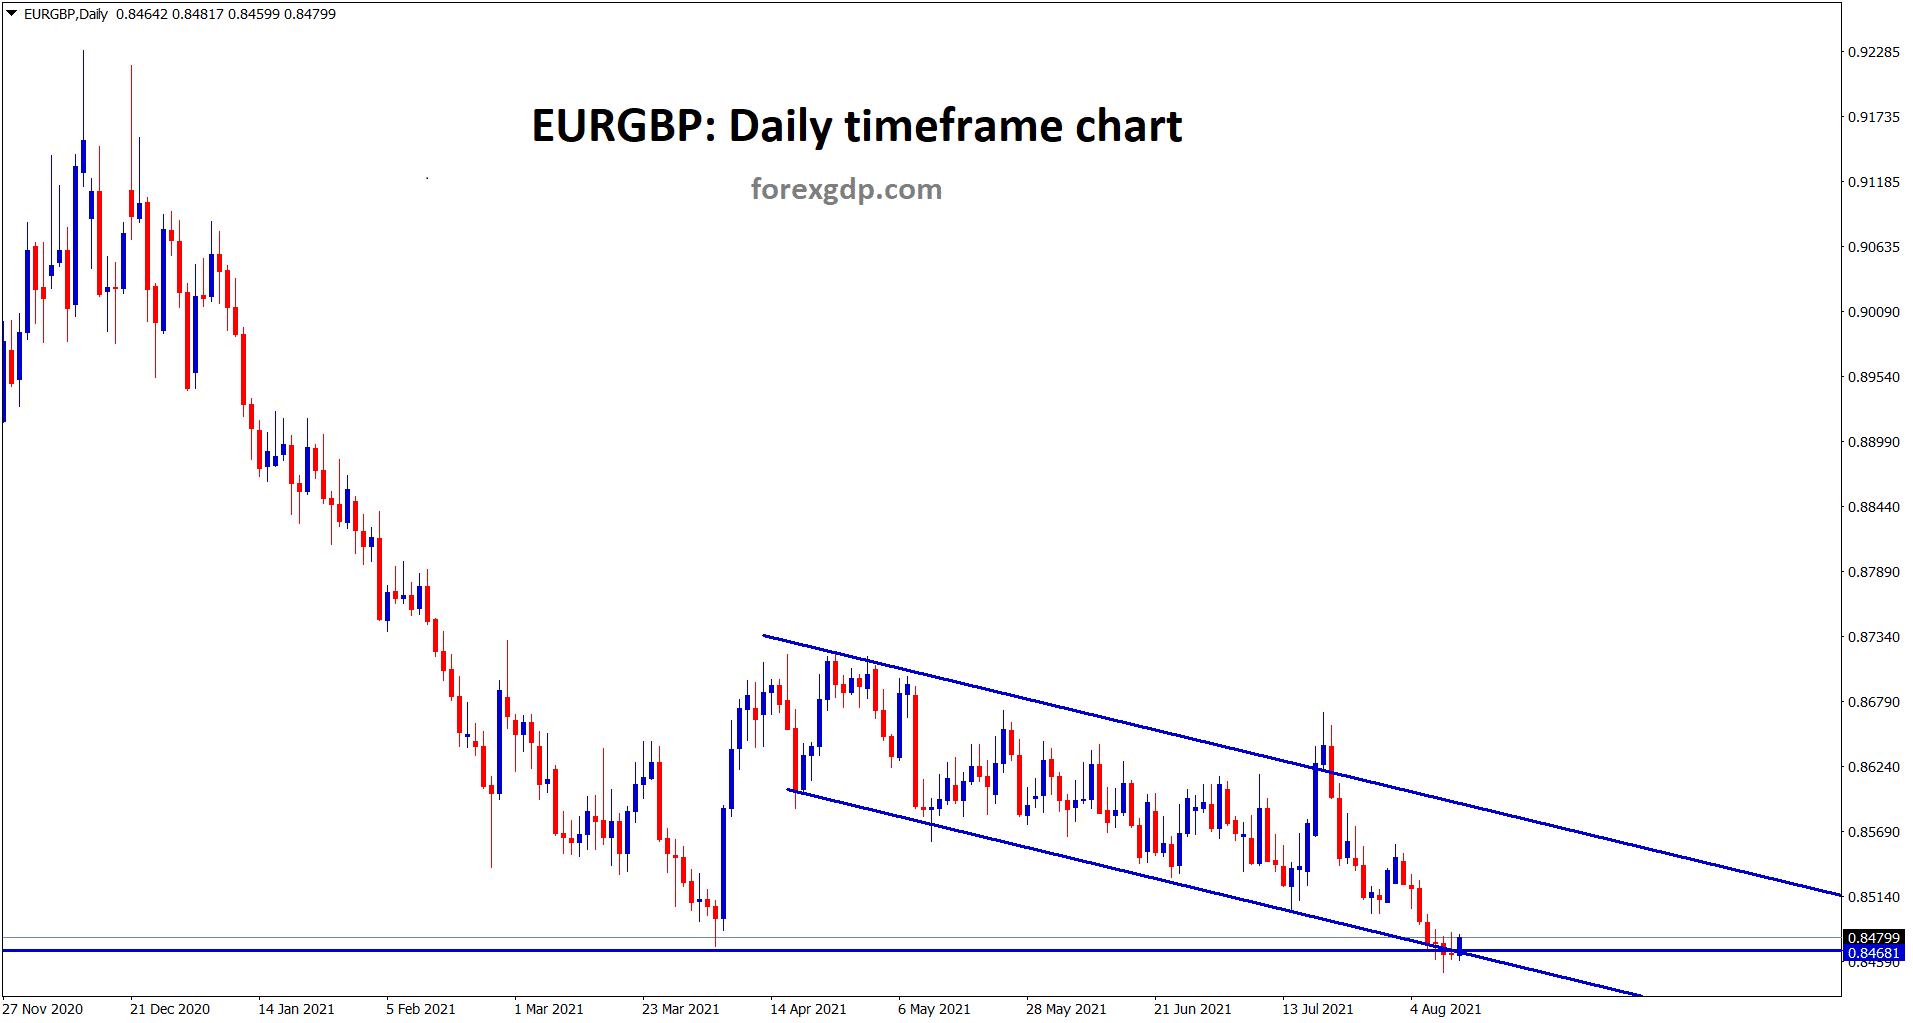 EURGBP is standing at the support and lower low level of the descending channel